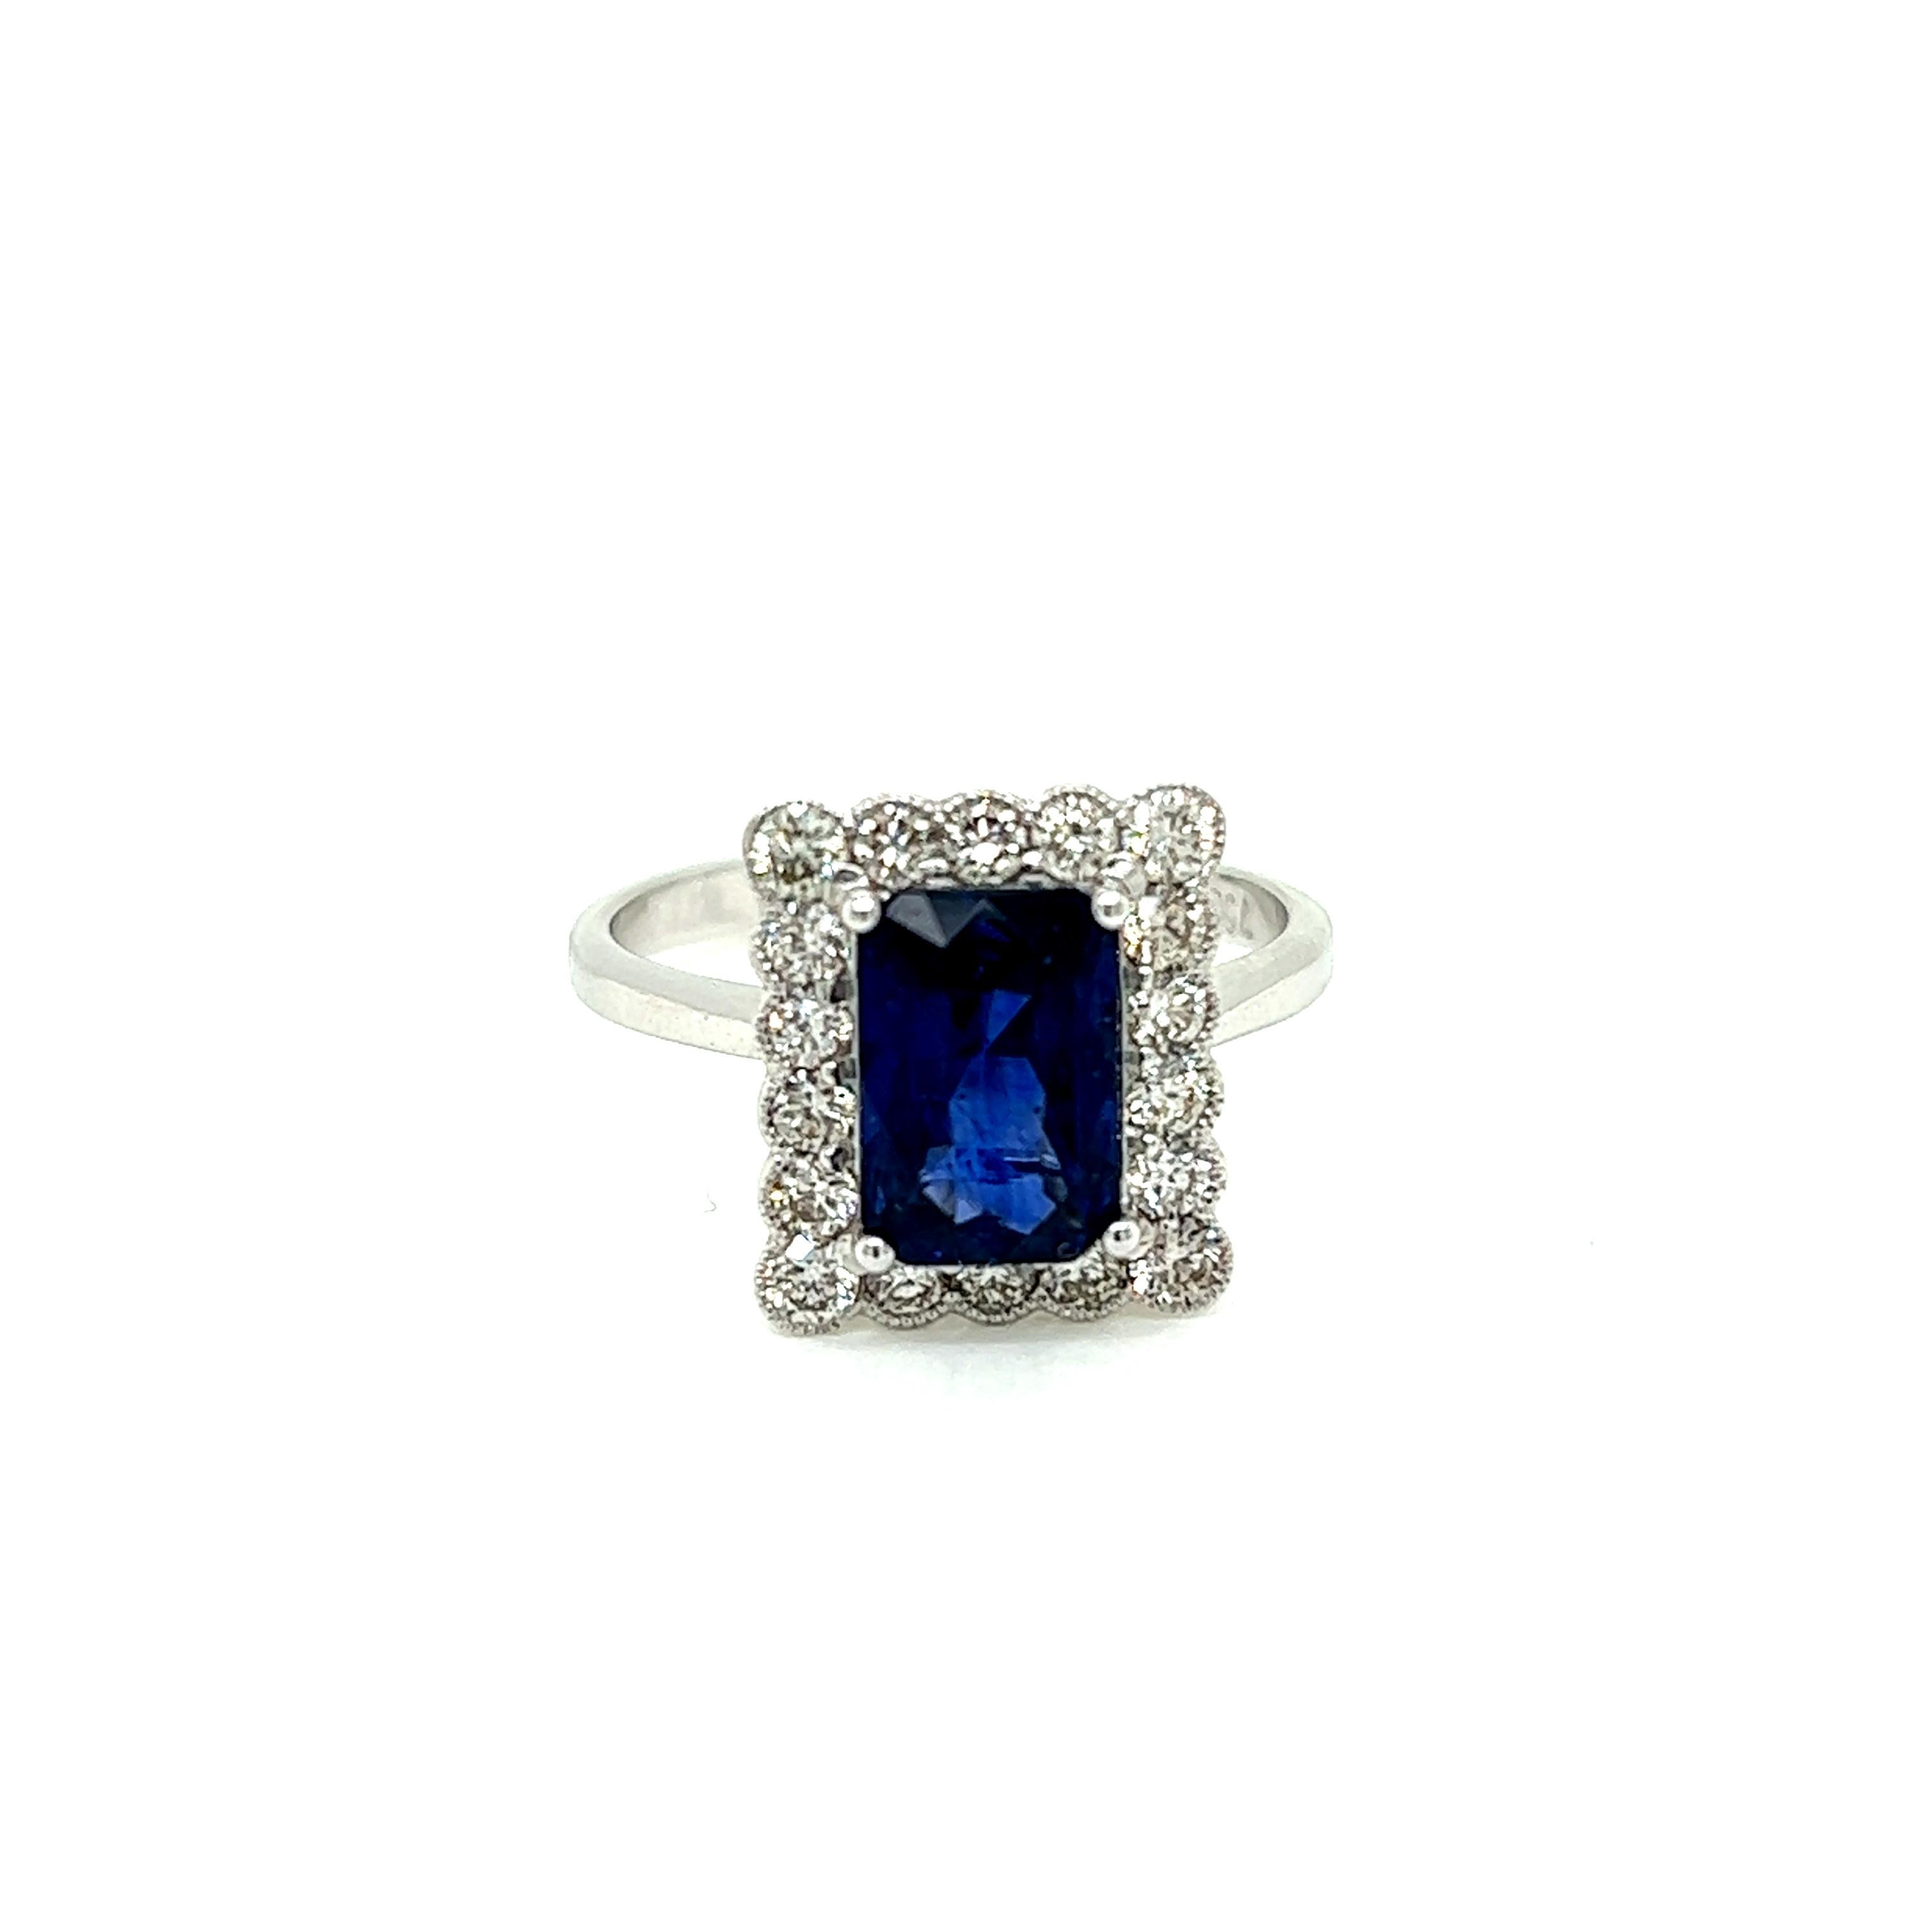 This alluring ring features a resplendent 2.35 carat Blue Sapphire at its centre. Surrounding this precious emerald cut stone are 18 Round Brilliant Diamonds set in 18K White Gold.

The Diamonds in the ring weigh a total of 0.58 carats and are of H